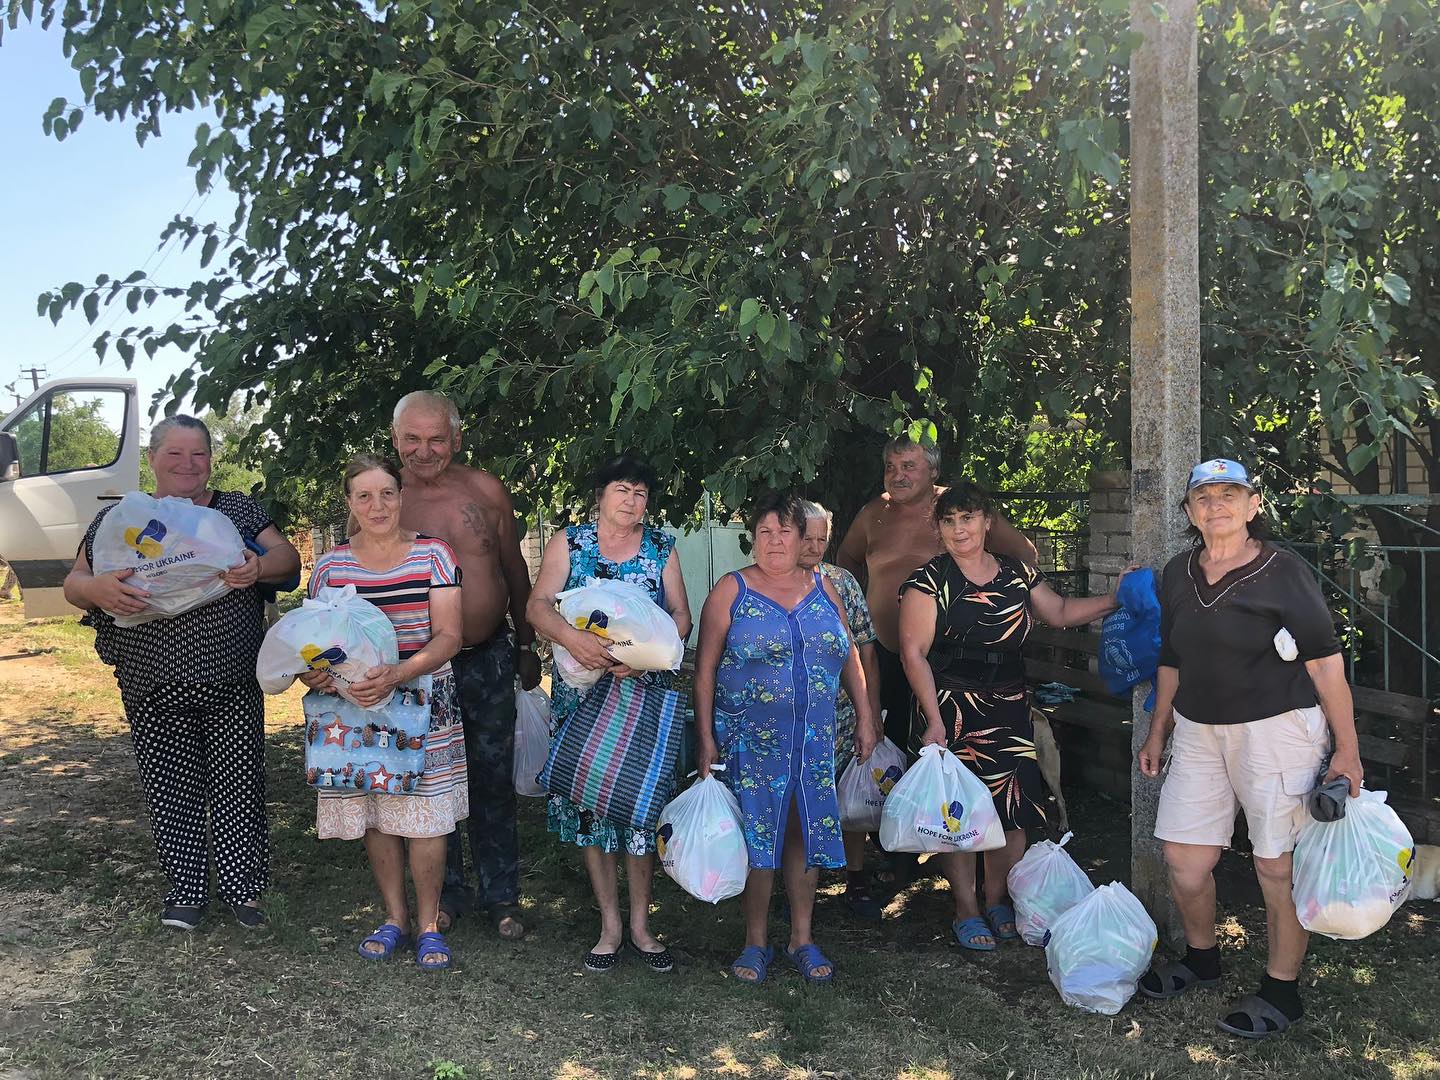 A group of people standing in front of a tree with bags.